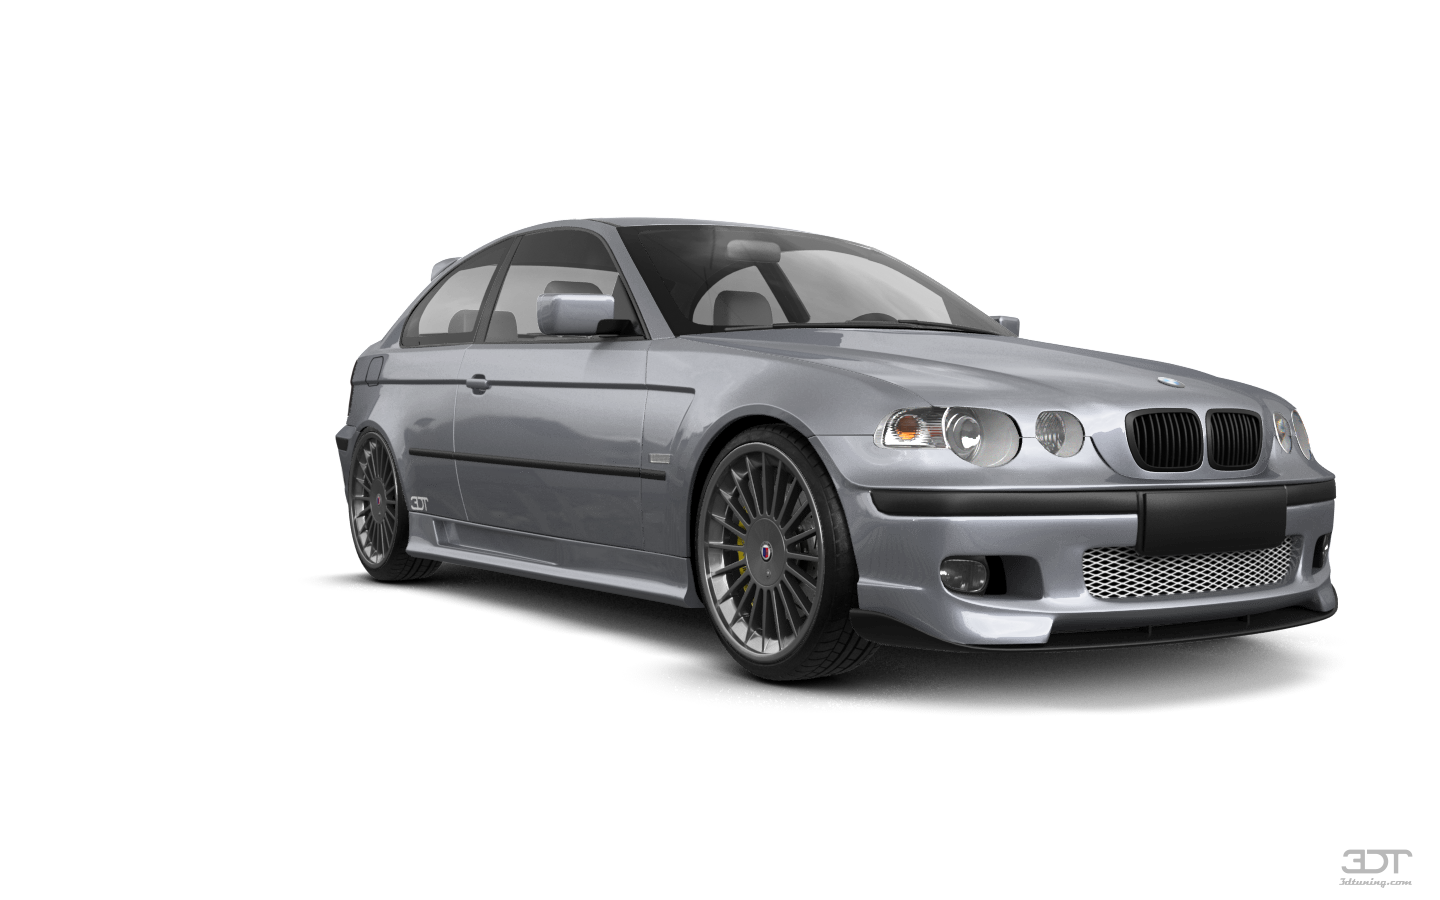 BMW 3 Series Compact 2000